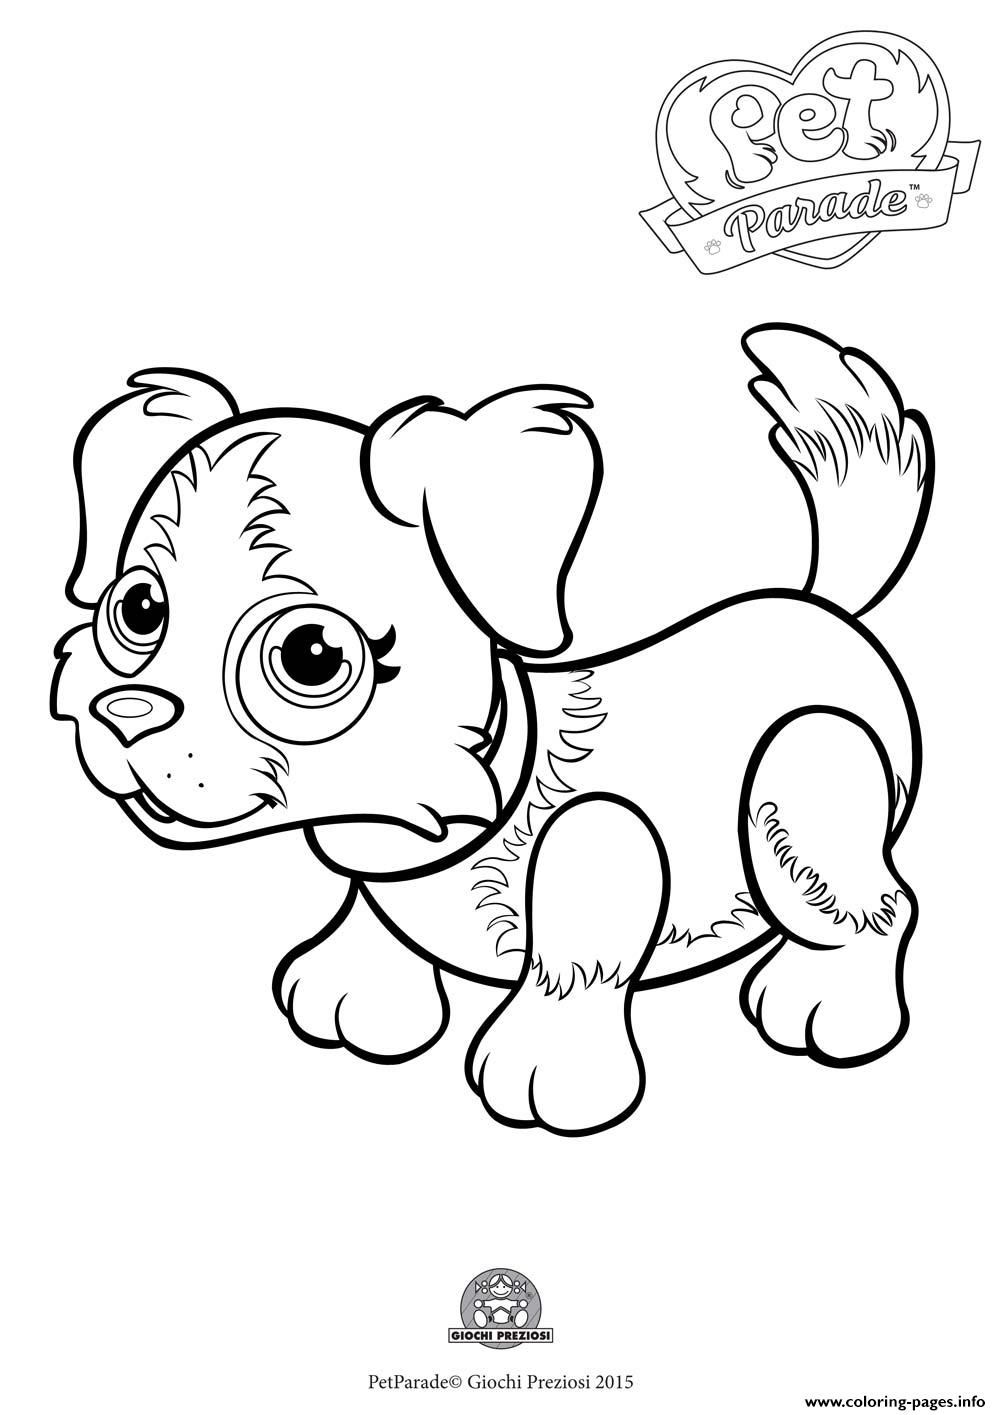 Print pet parade cute dog border collie 1 Coloring pages Free ...